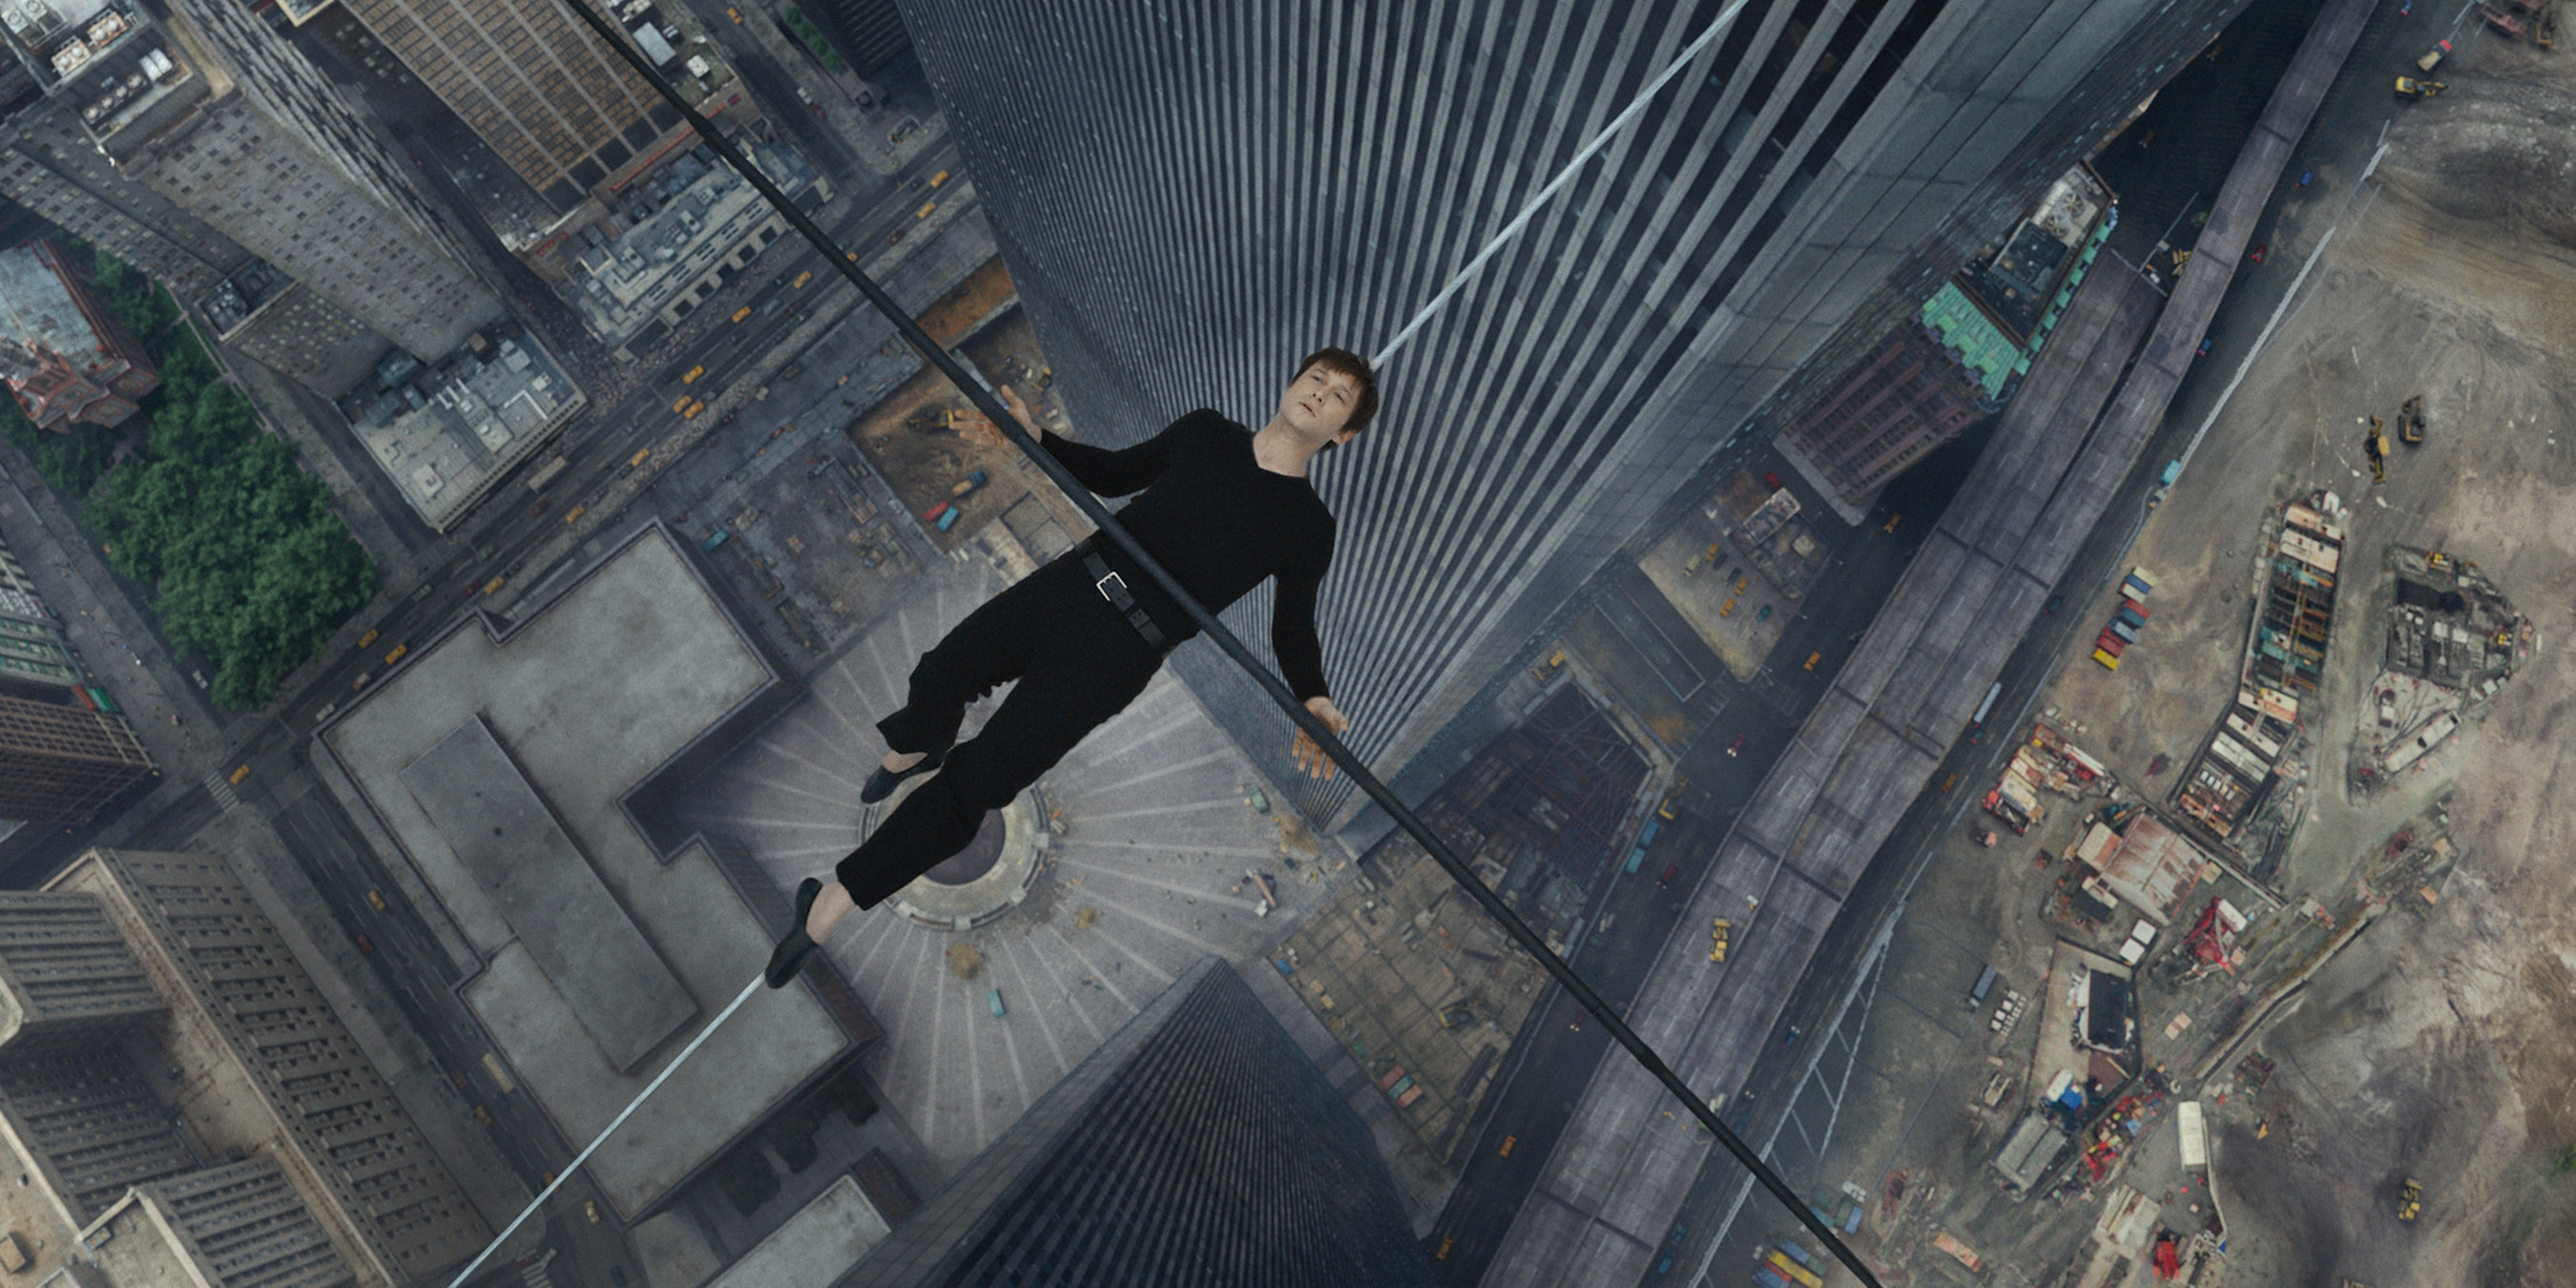 AFTER: Atomic Fiction Takes the Lead to Bring Robert Zemeckis' "The Walk" To New Heights